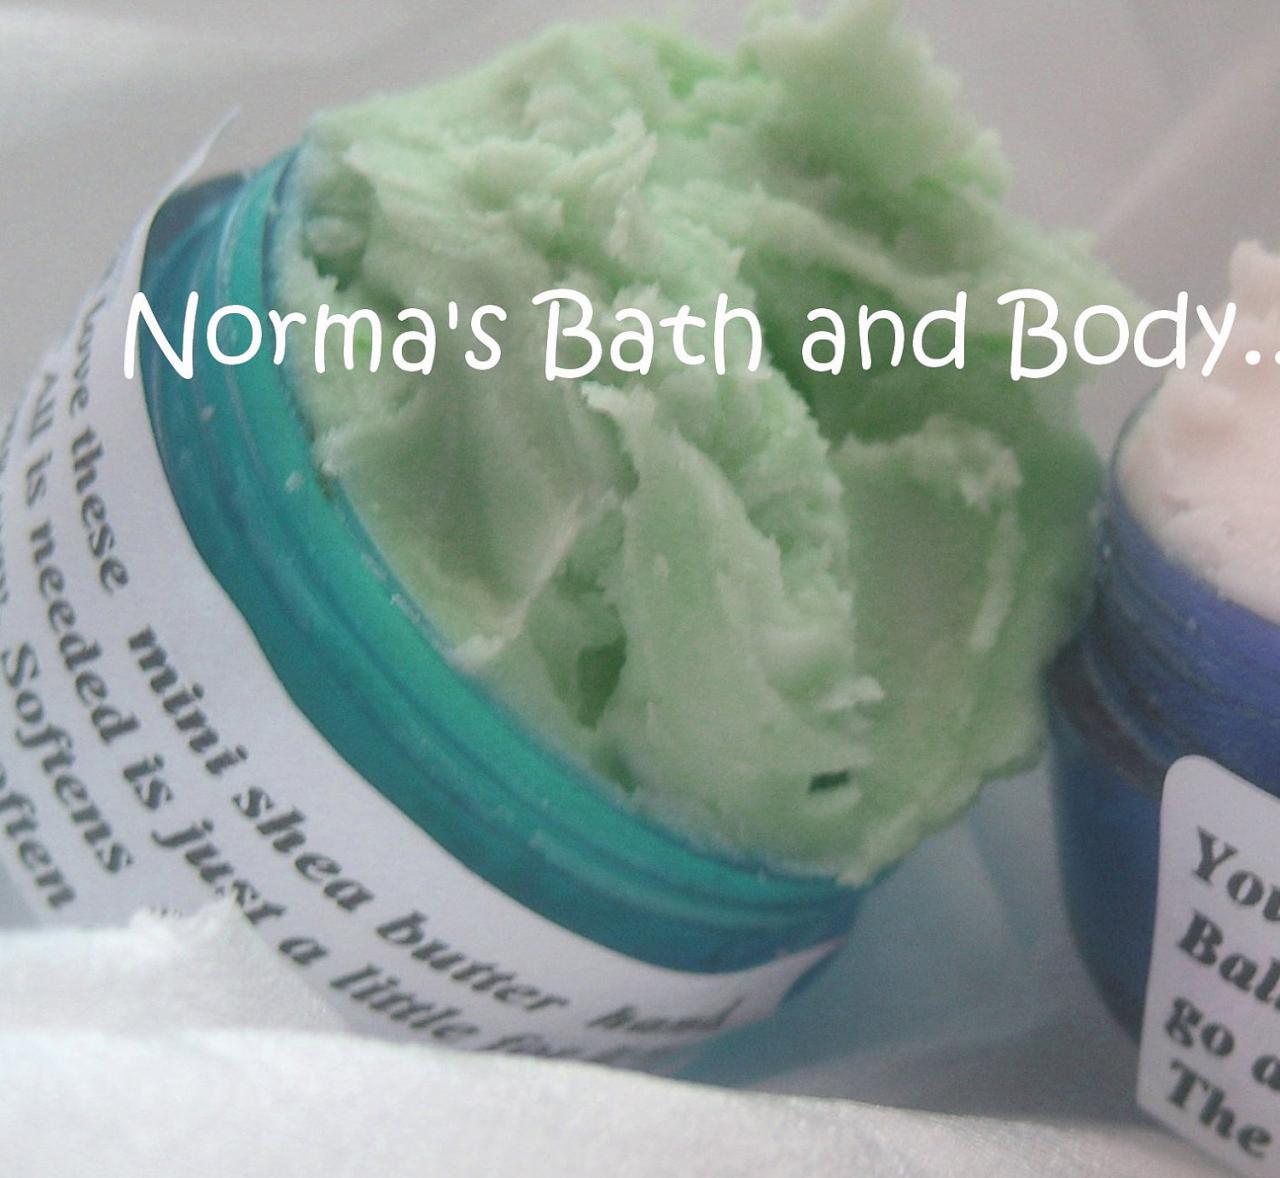 Mint Chocolate Hand Body Balm, Chocolate, Body Balm, Balm, Beauty, Samples, Scented, Normas-